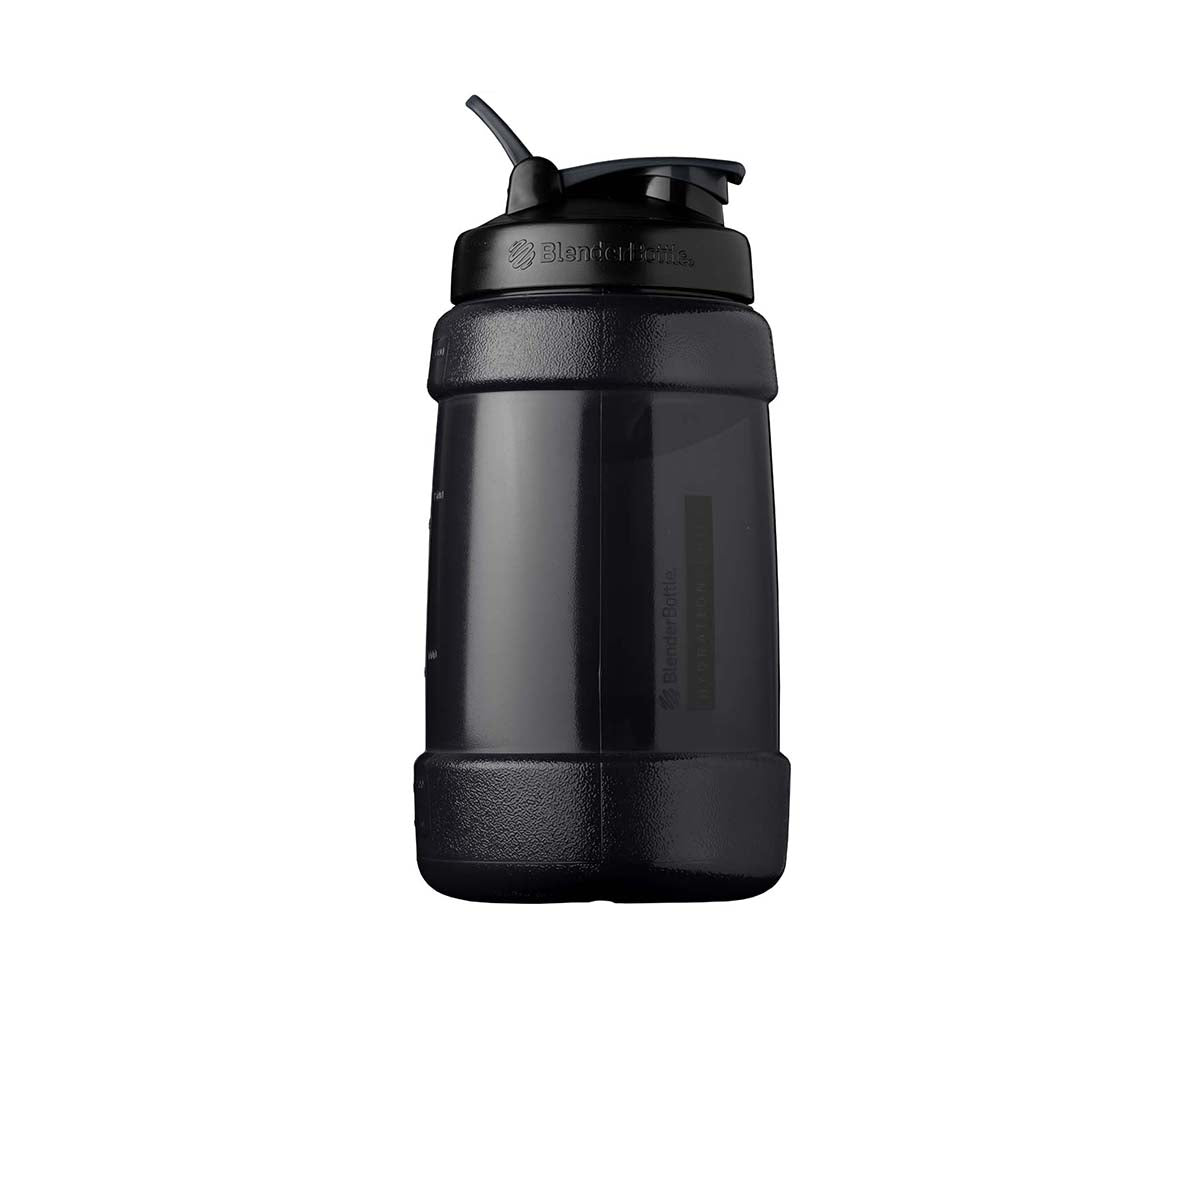 Large water bottle and water jug